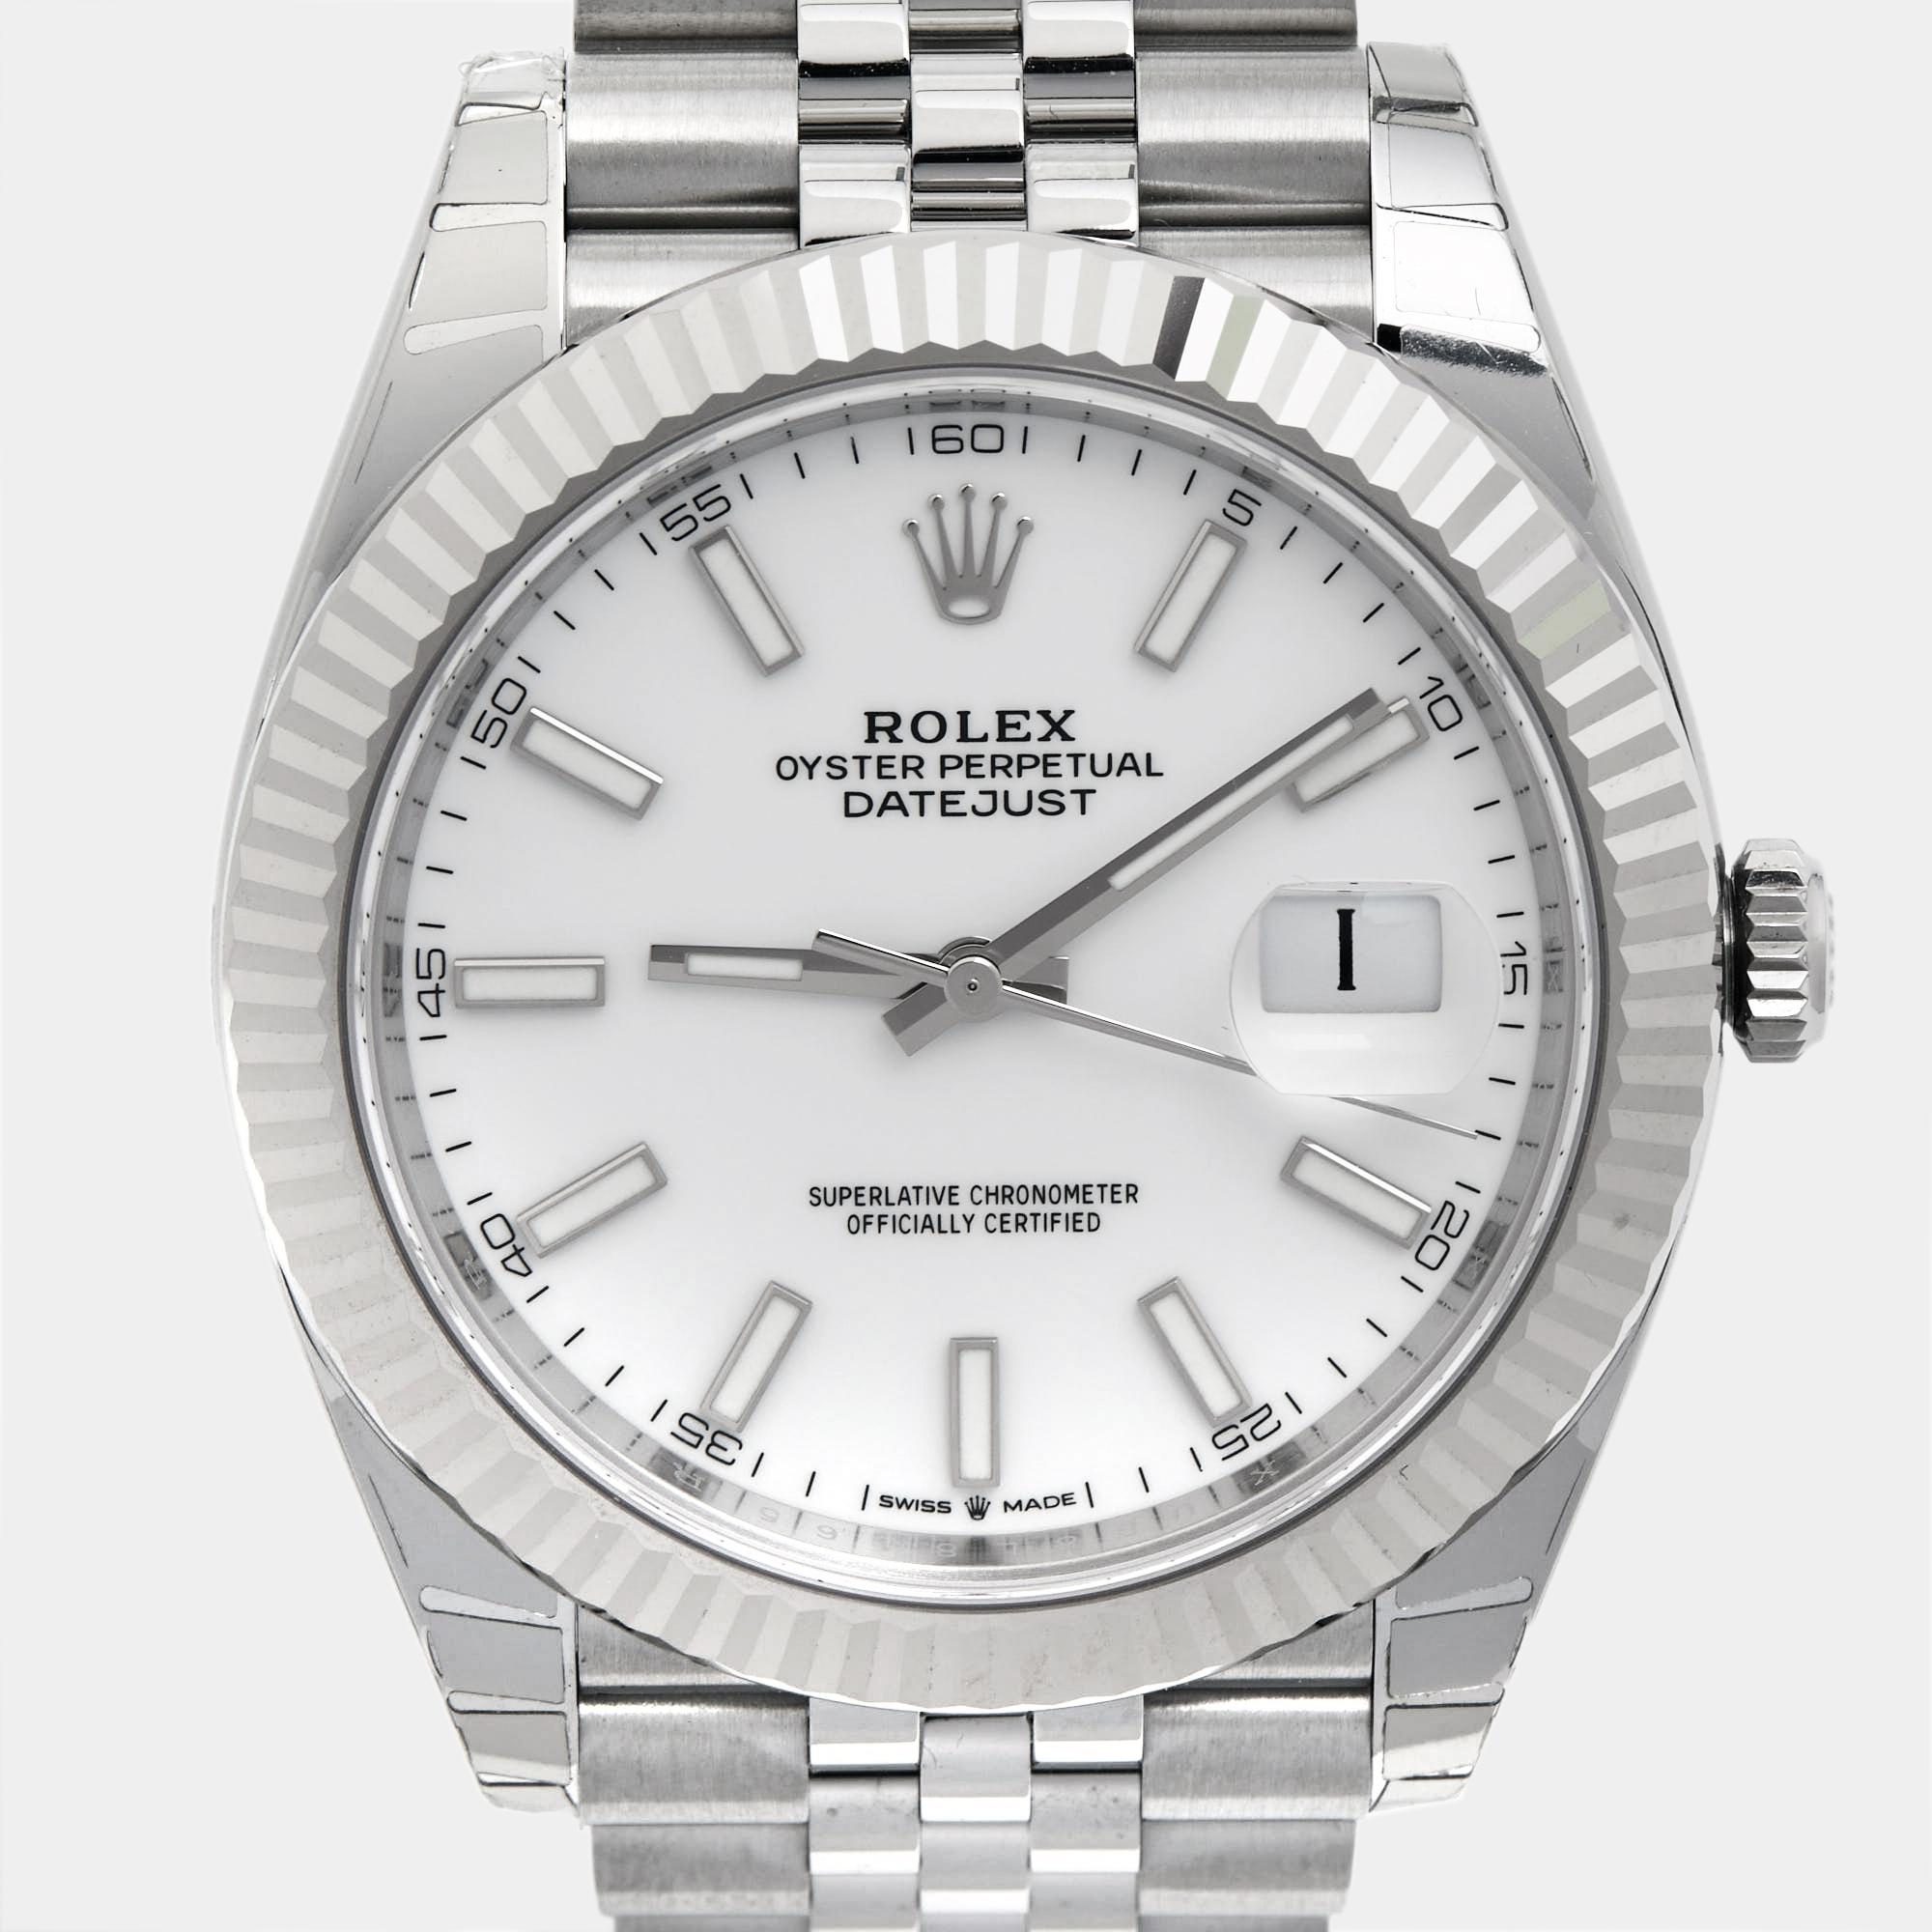 Rolex Silver 18K White Gold And Stainless Steel Datejust 126334 Men's Wristwatch 41 Mm